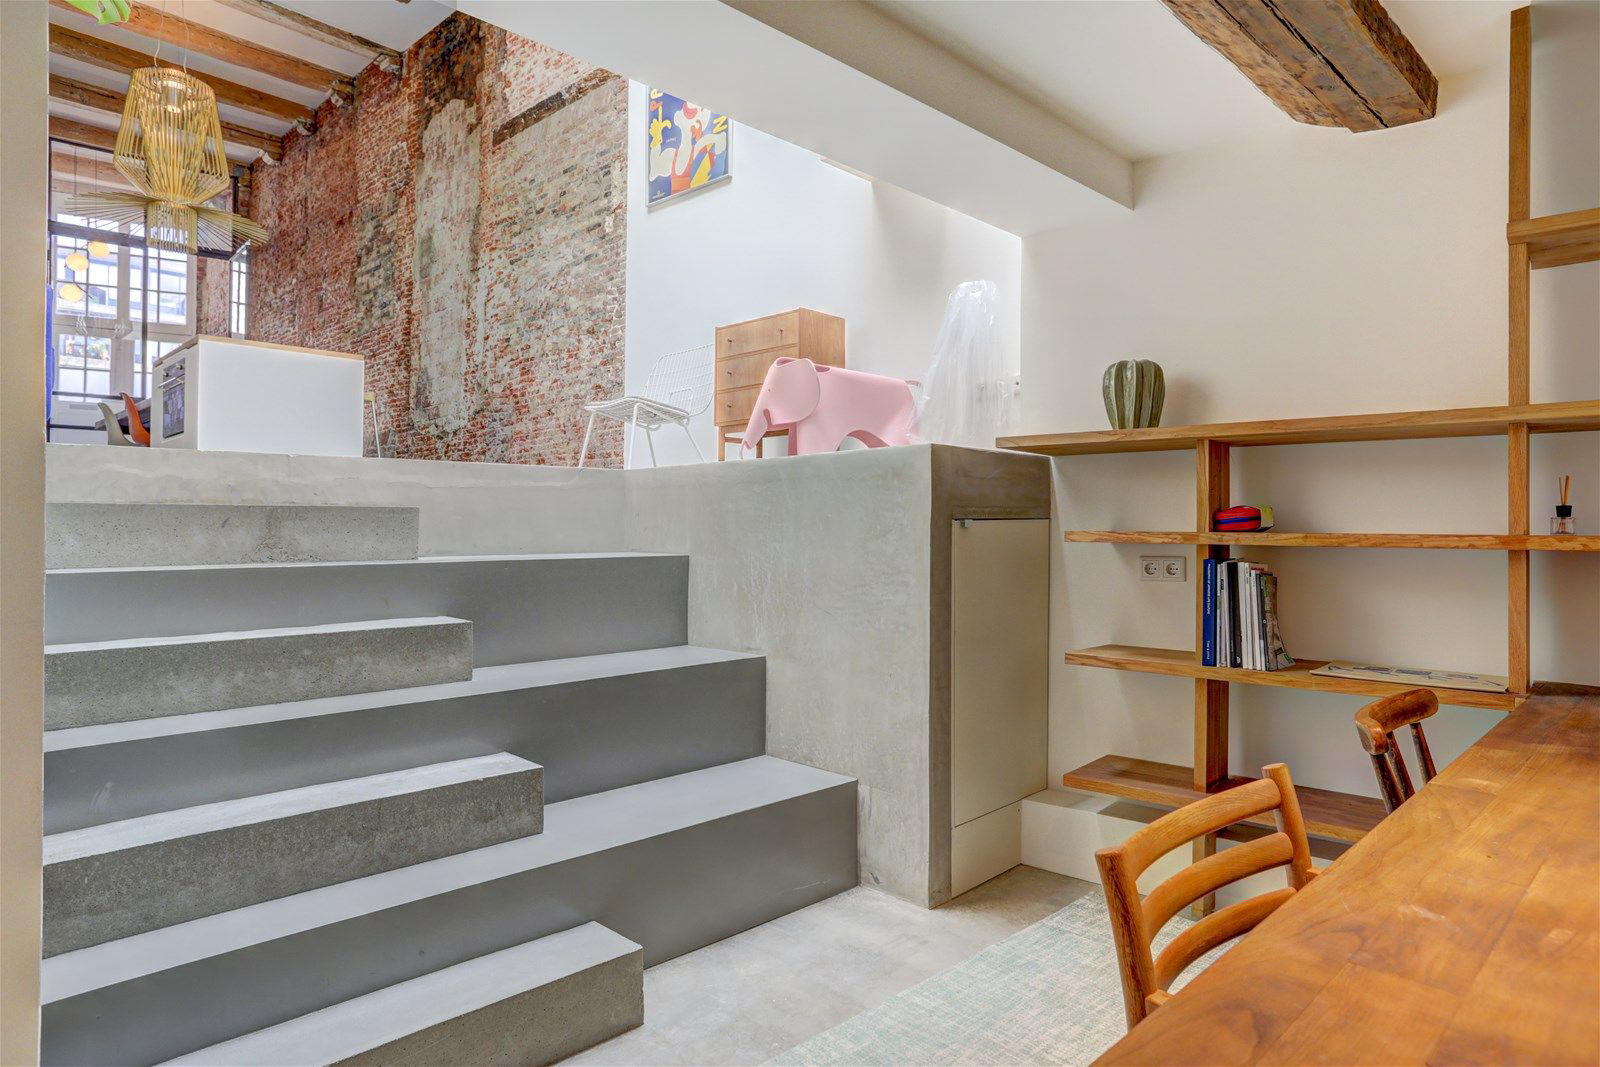 Loft living gets an upgrade at this one-bedroom apartment in Amsterdam